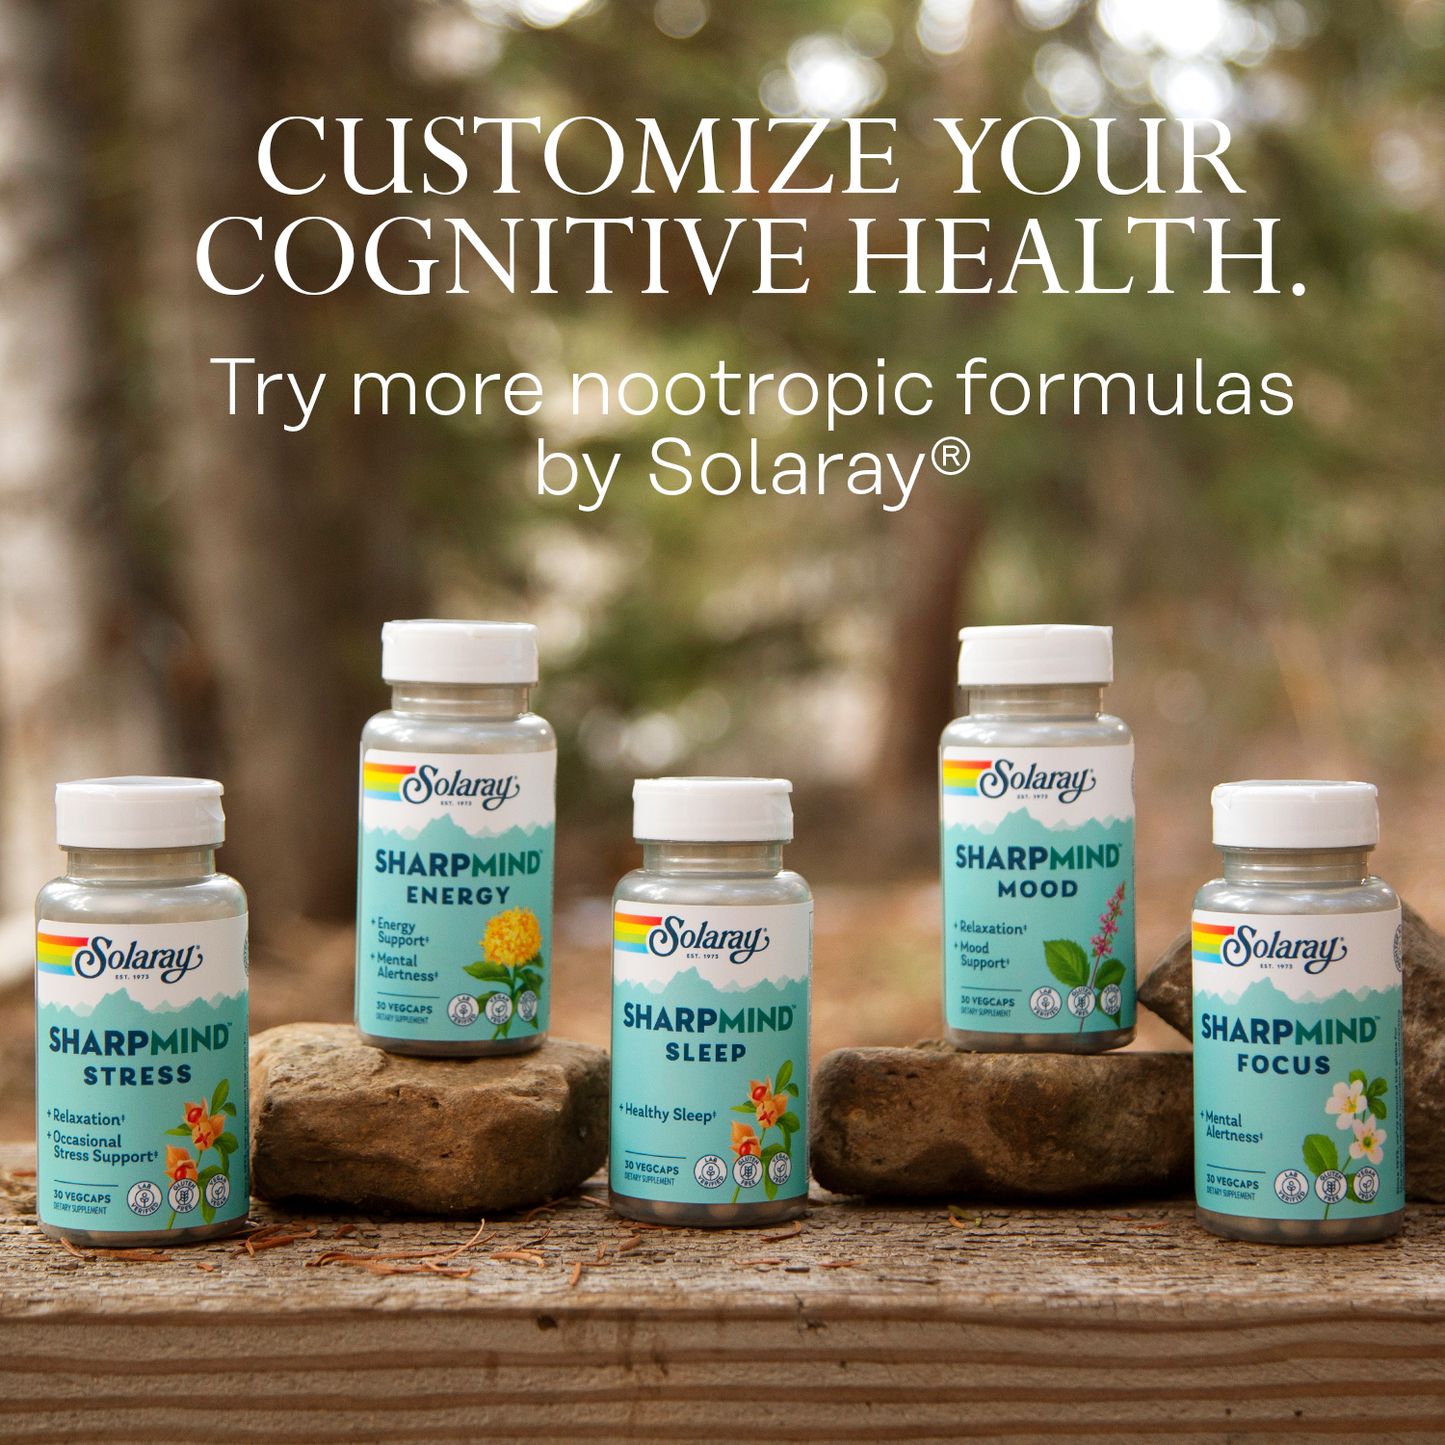 Solaray SharpMind, Cognitive Support Formula With Ginkgo Leaf, L-Dopa, Huperzine A & More for Healthy Brain, Mood & Memory Support 60 VegCaps